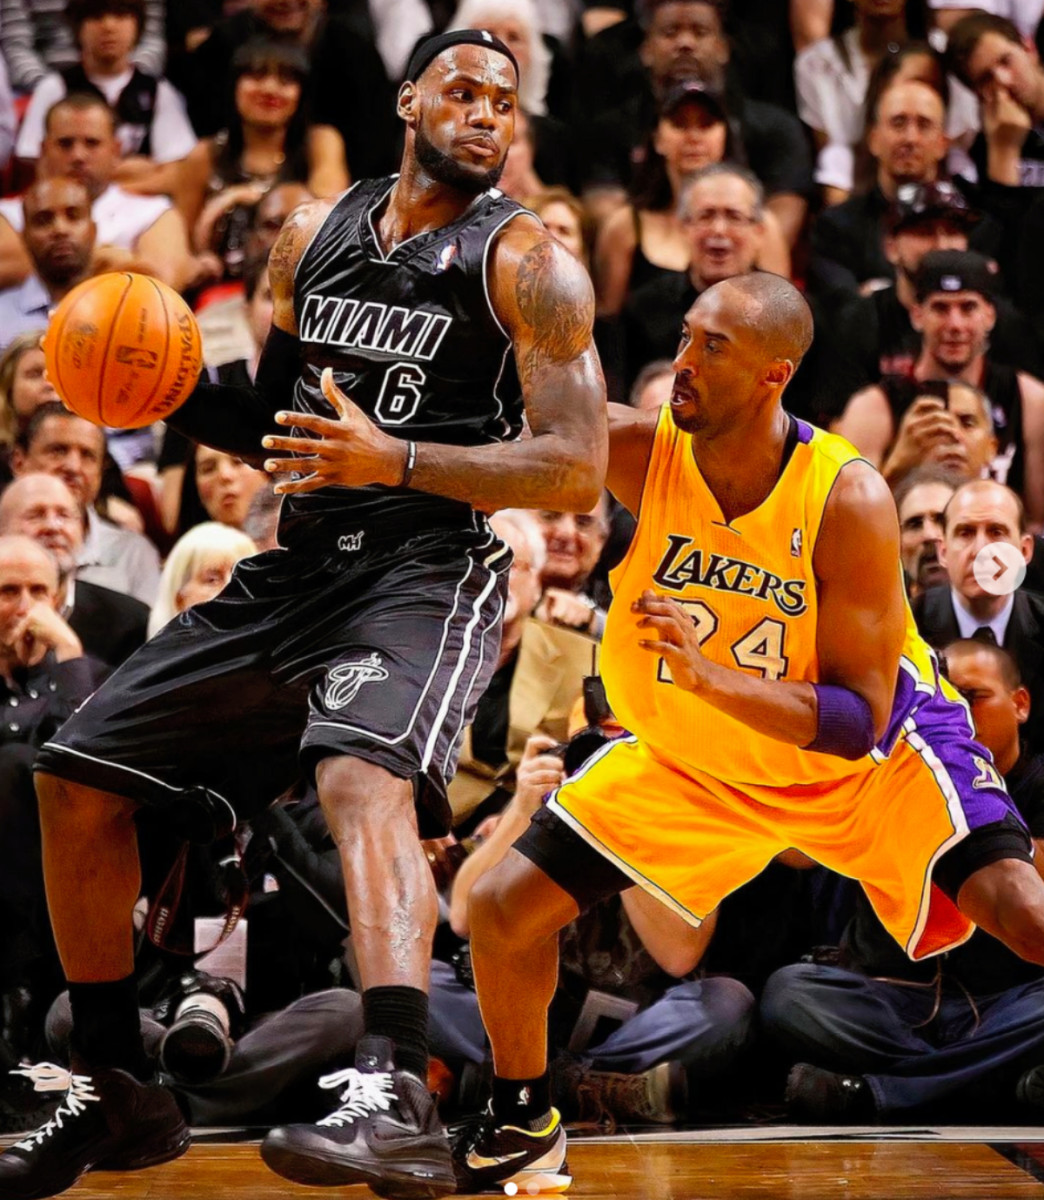 NBA Fans React To Picture Of LeBron James vs. Kobe Bryant: 